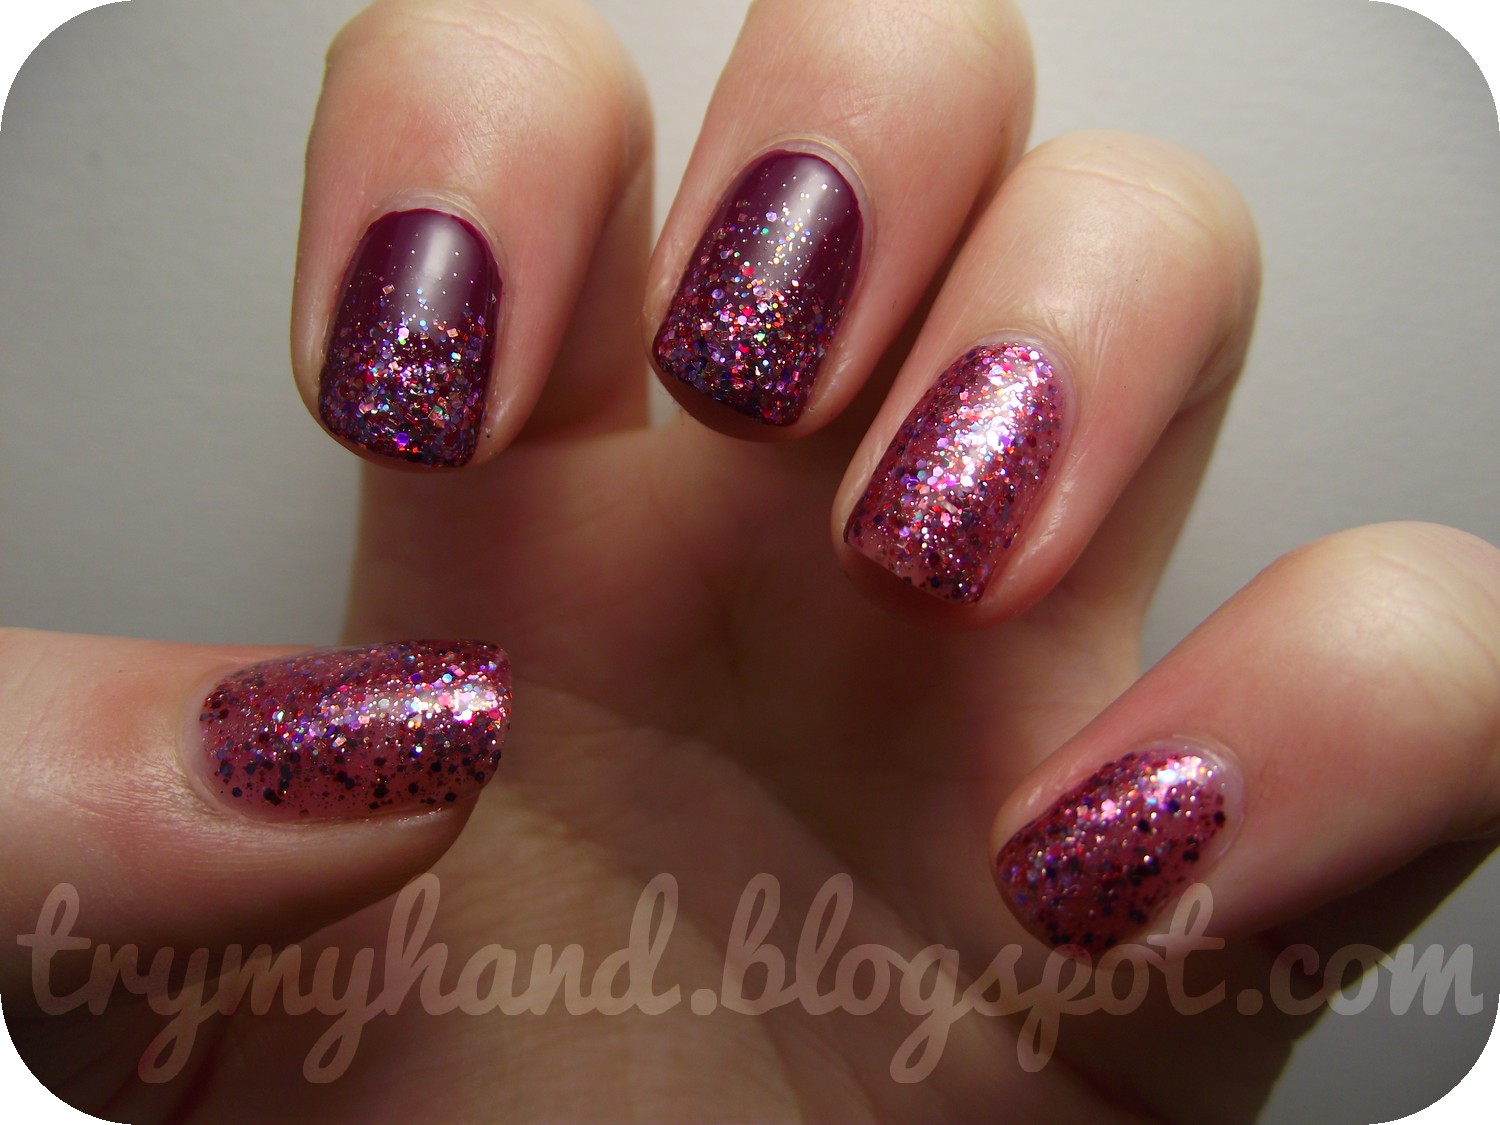 Try My Hand: Swatch : Shimmer Polish - Fanny